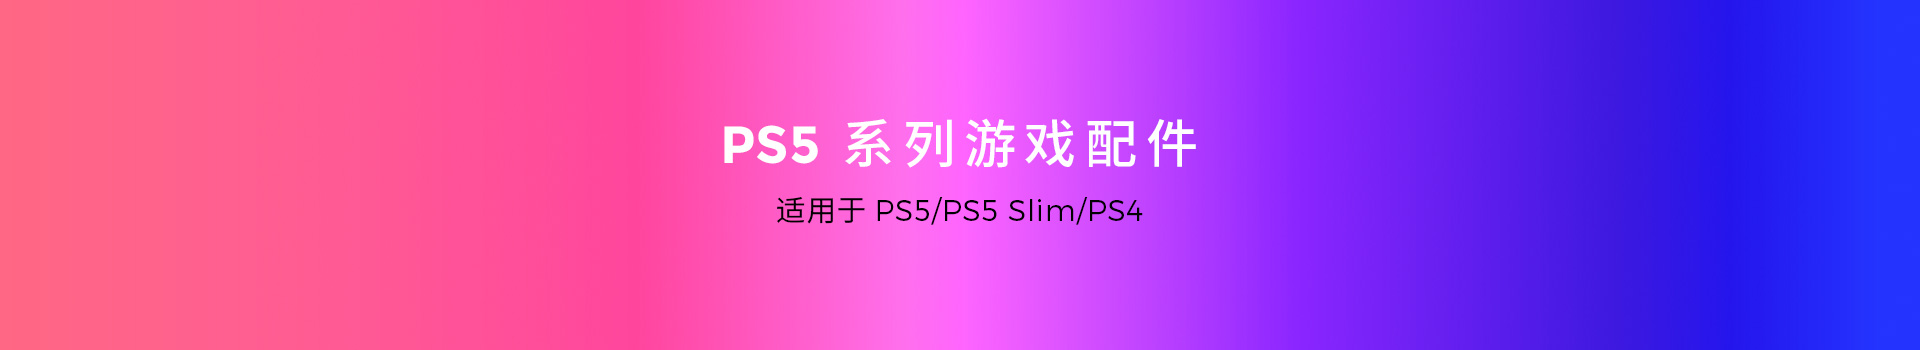 PS5/PS4系列游戏配件